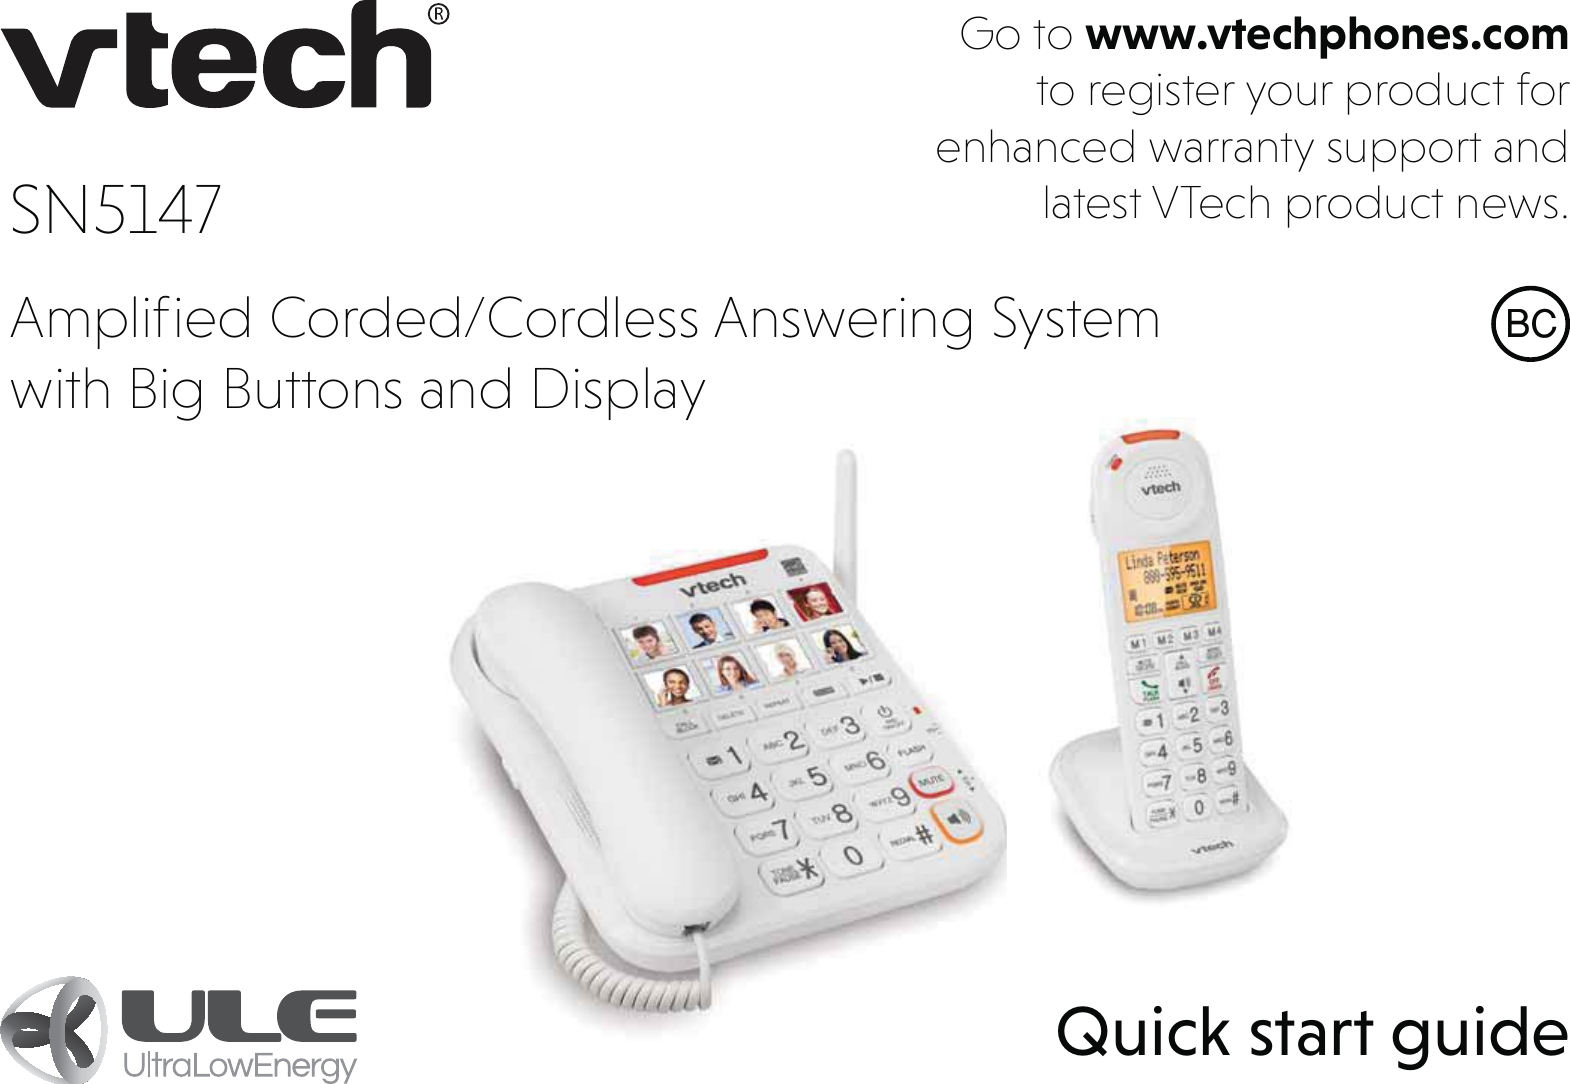 Go to www.vtechphones.com to register your product for enhanced warranty support and latest VTech product news.%&amp;SN5147 Ampliﬁed Corded/Cordless Answering System with Big Buttons and DisplayQuick start guide